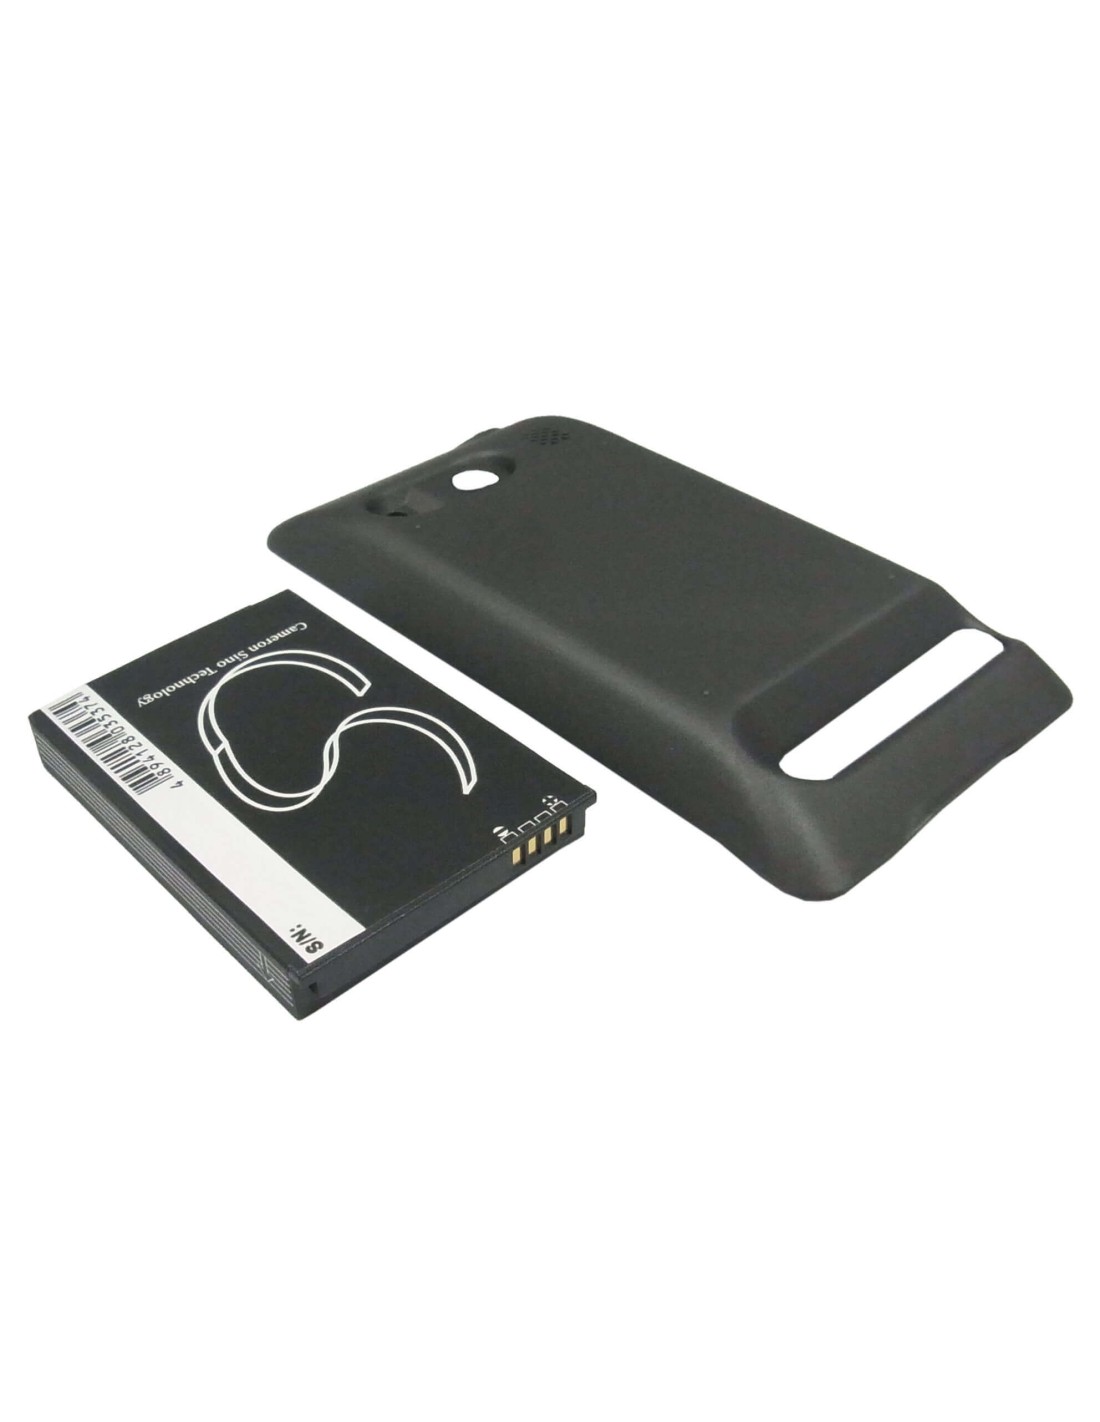 Battery for HTC EVO 4G, A9292, Supersonic, black back cover 3.7V, 2200mAh - 8.14Wh